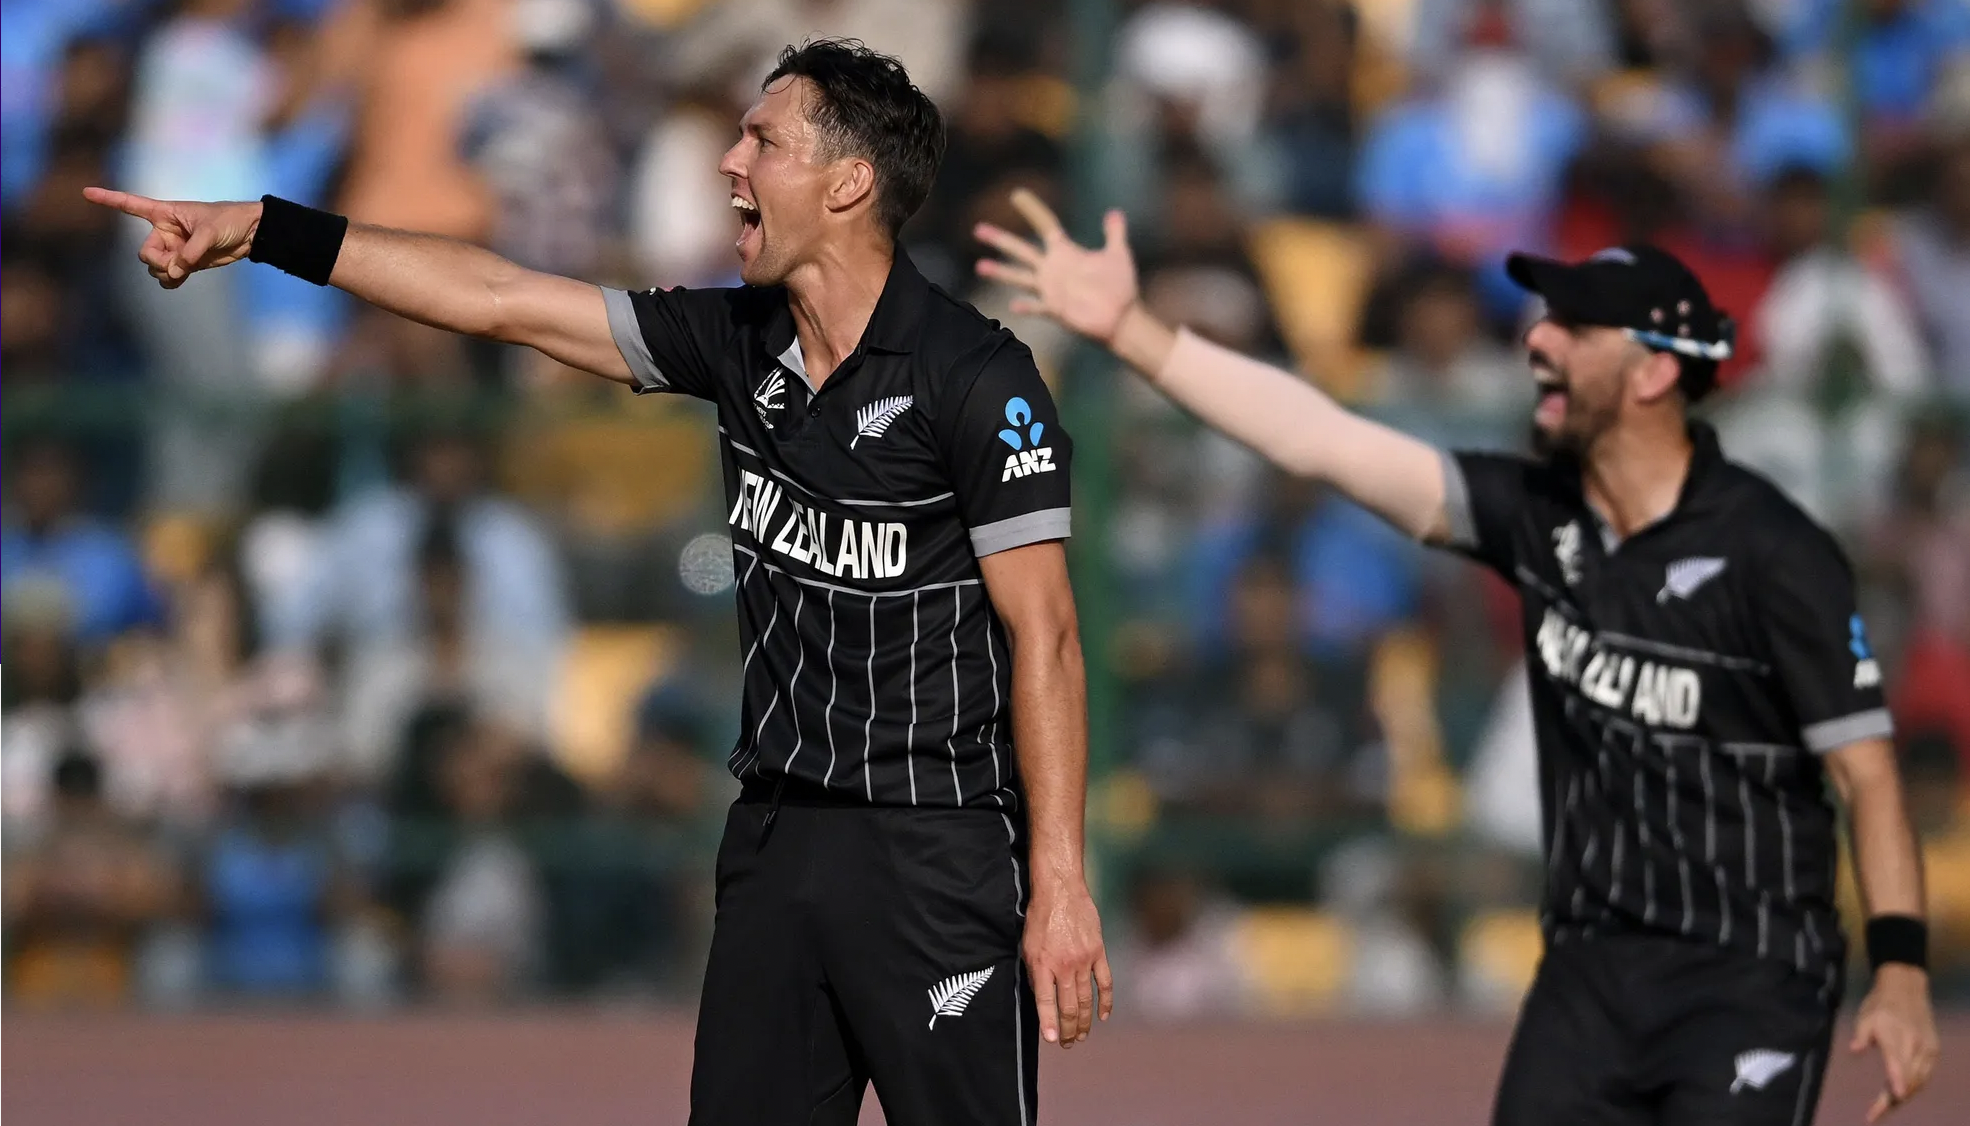 Cricket Thrills: New Zealand’s Rise and Pakistan’s Odds in the World Cup Drama